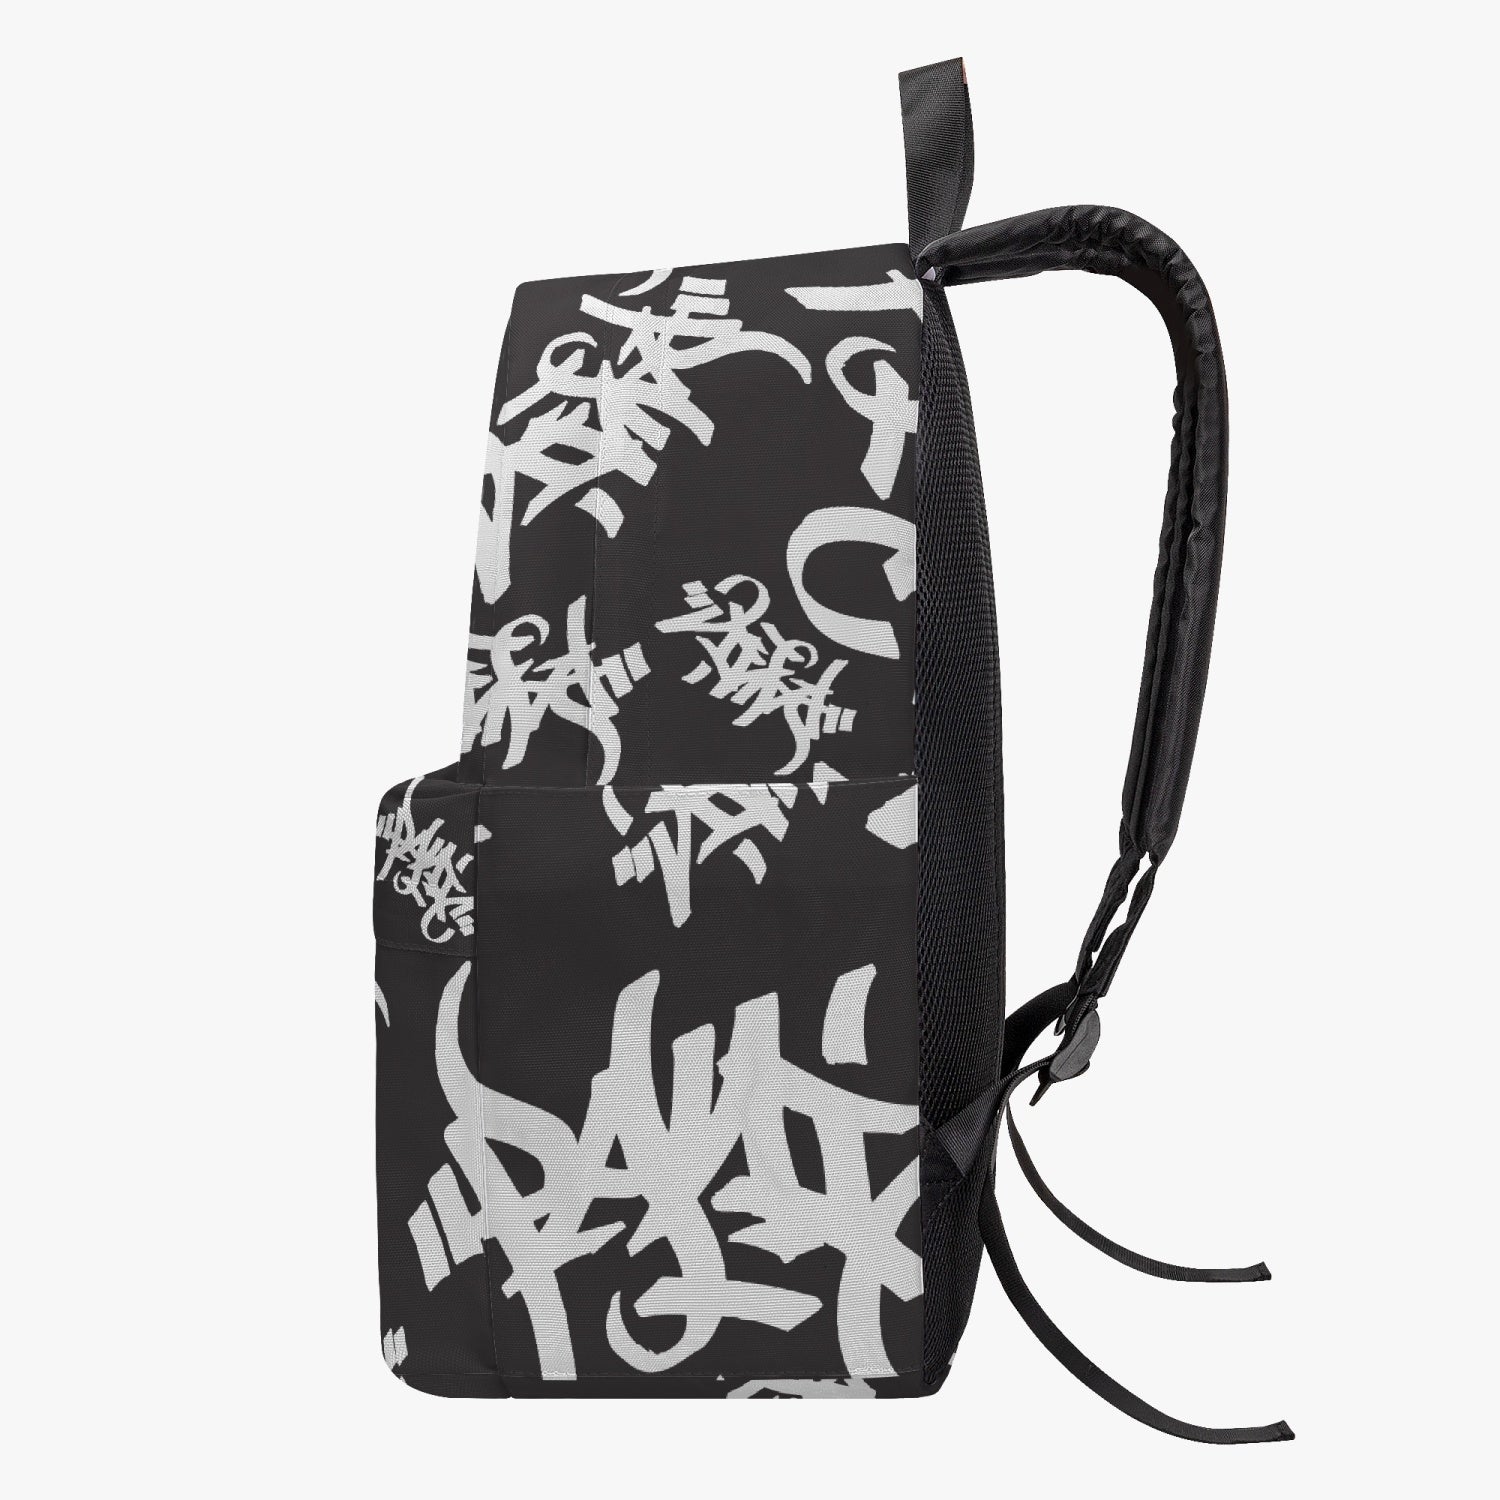 THE TAG BLACK & WHITE CANVAS BACKPACK